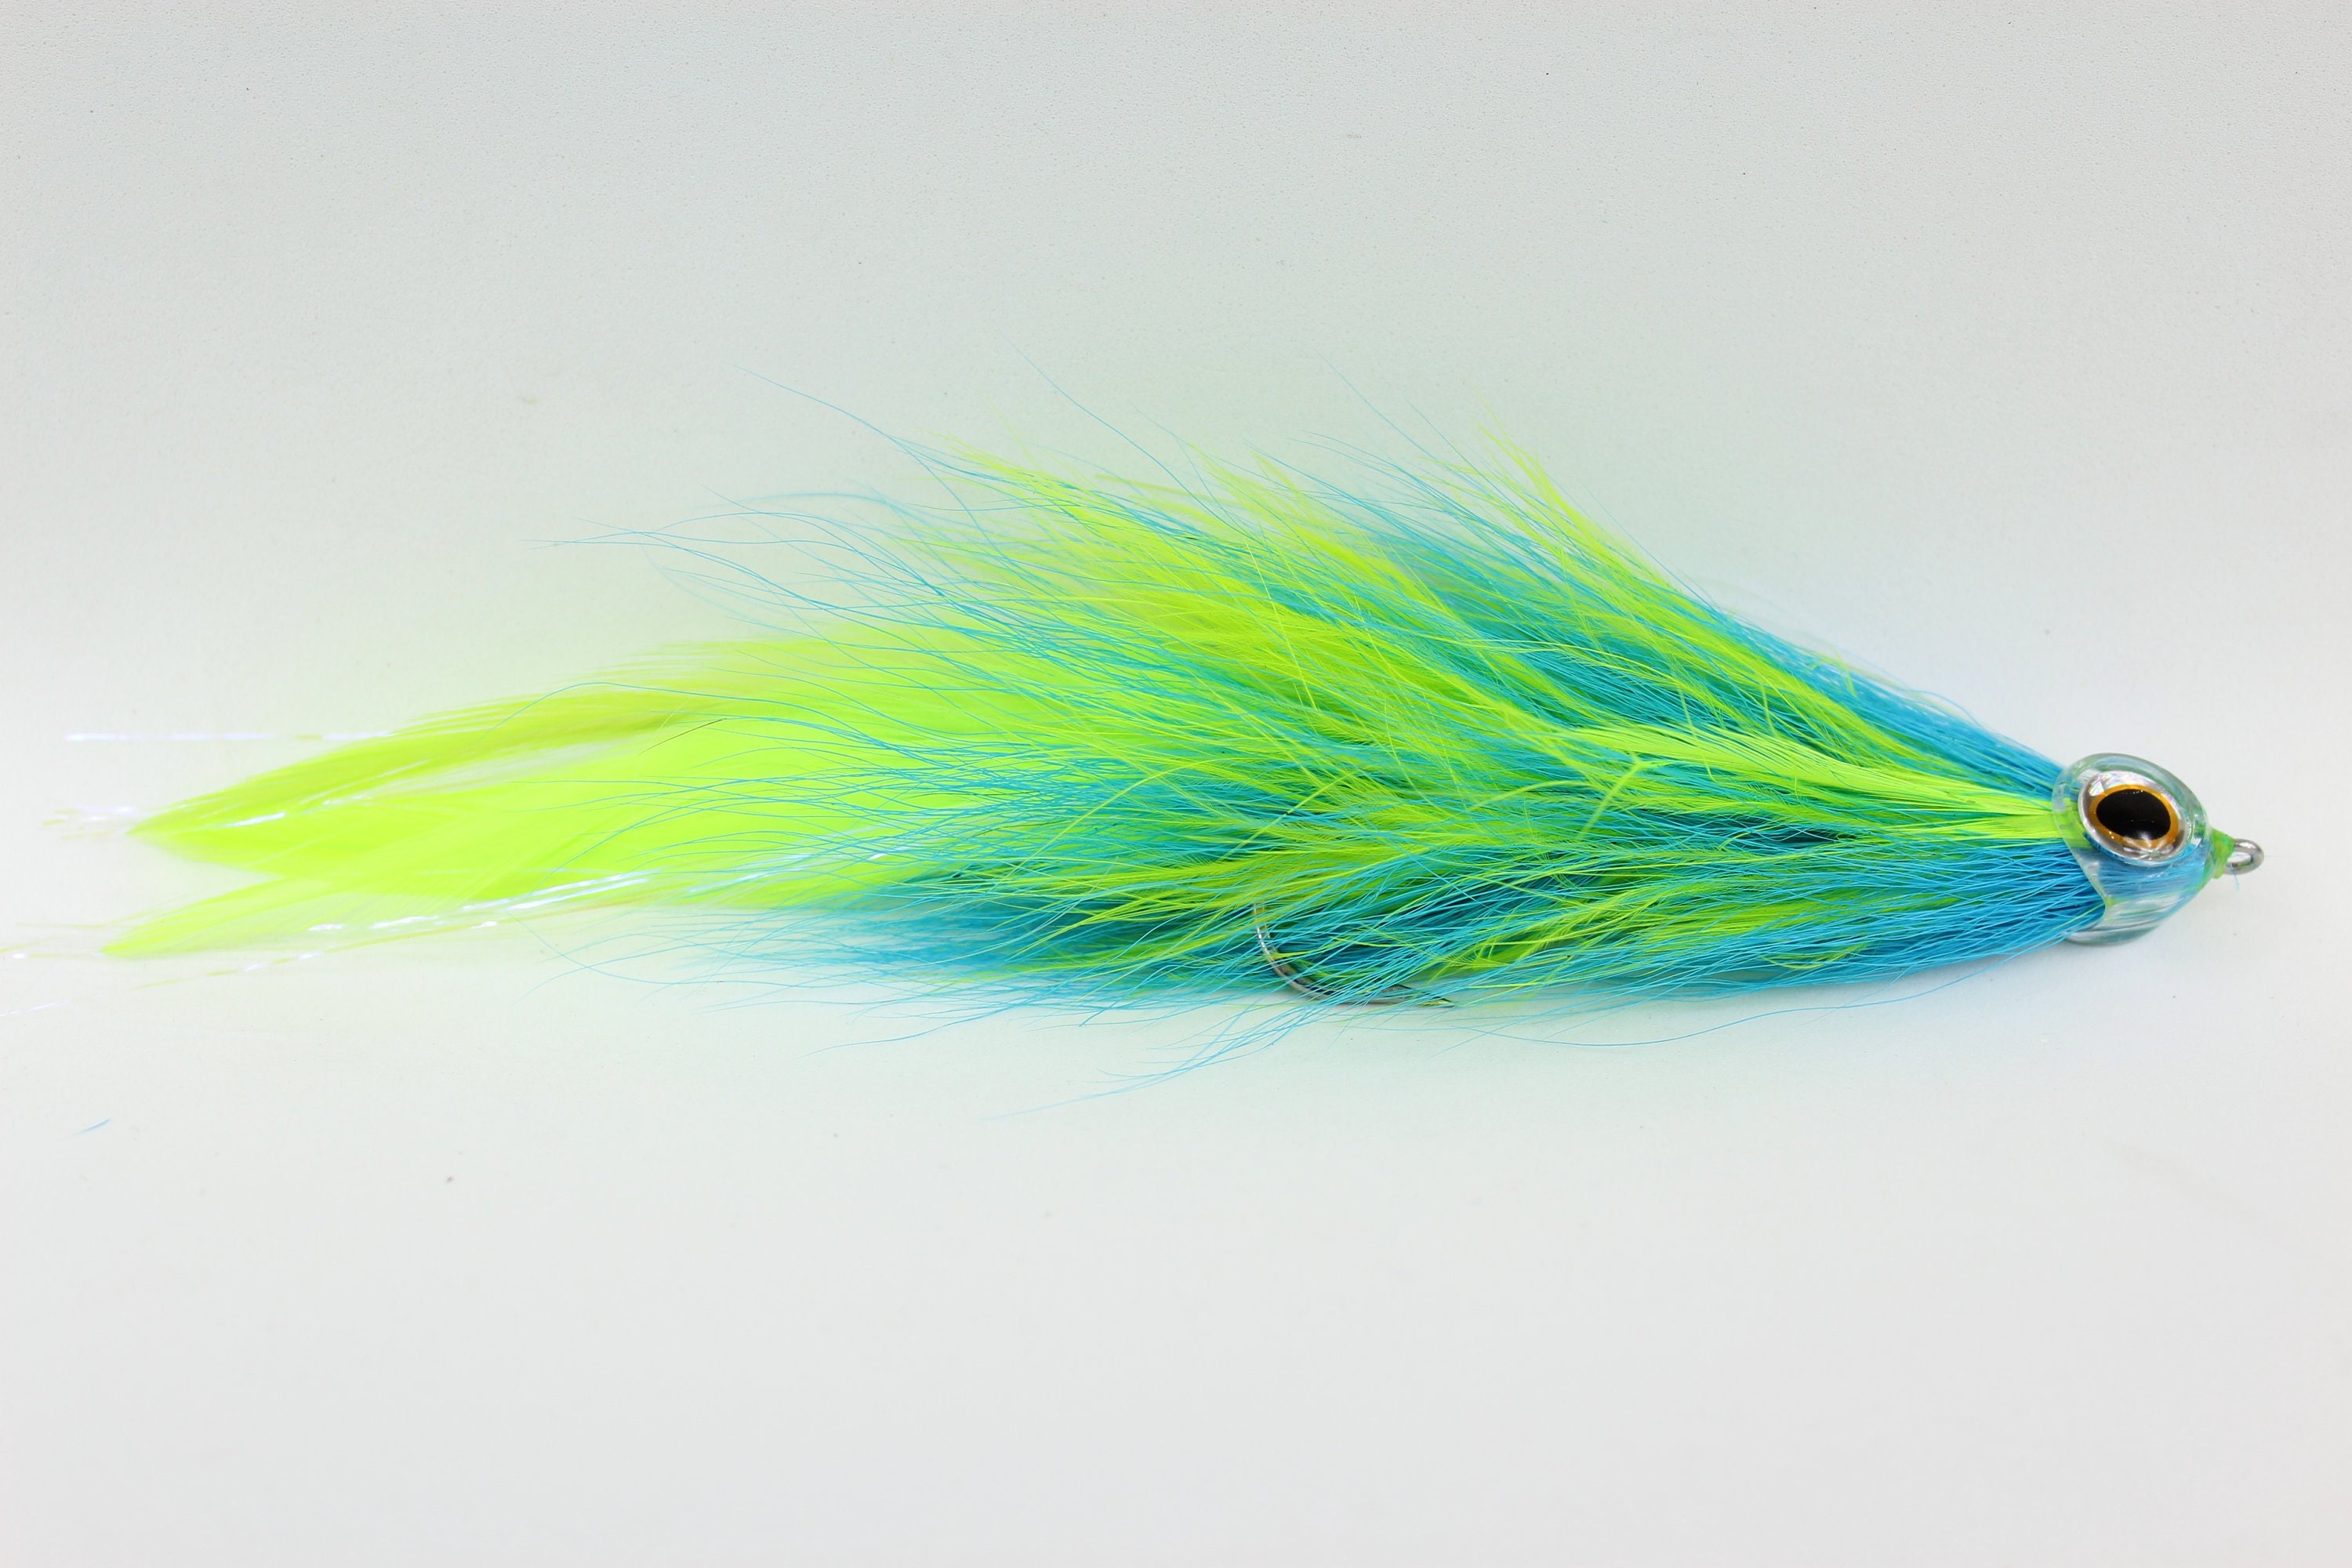 Blue and Chartreuse Jointed Muskie Fly Pike Bass Streamers Saltwater 78 Lure  